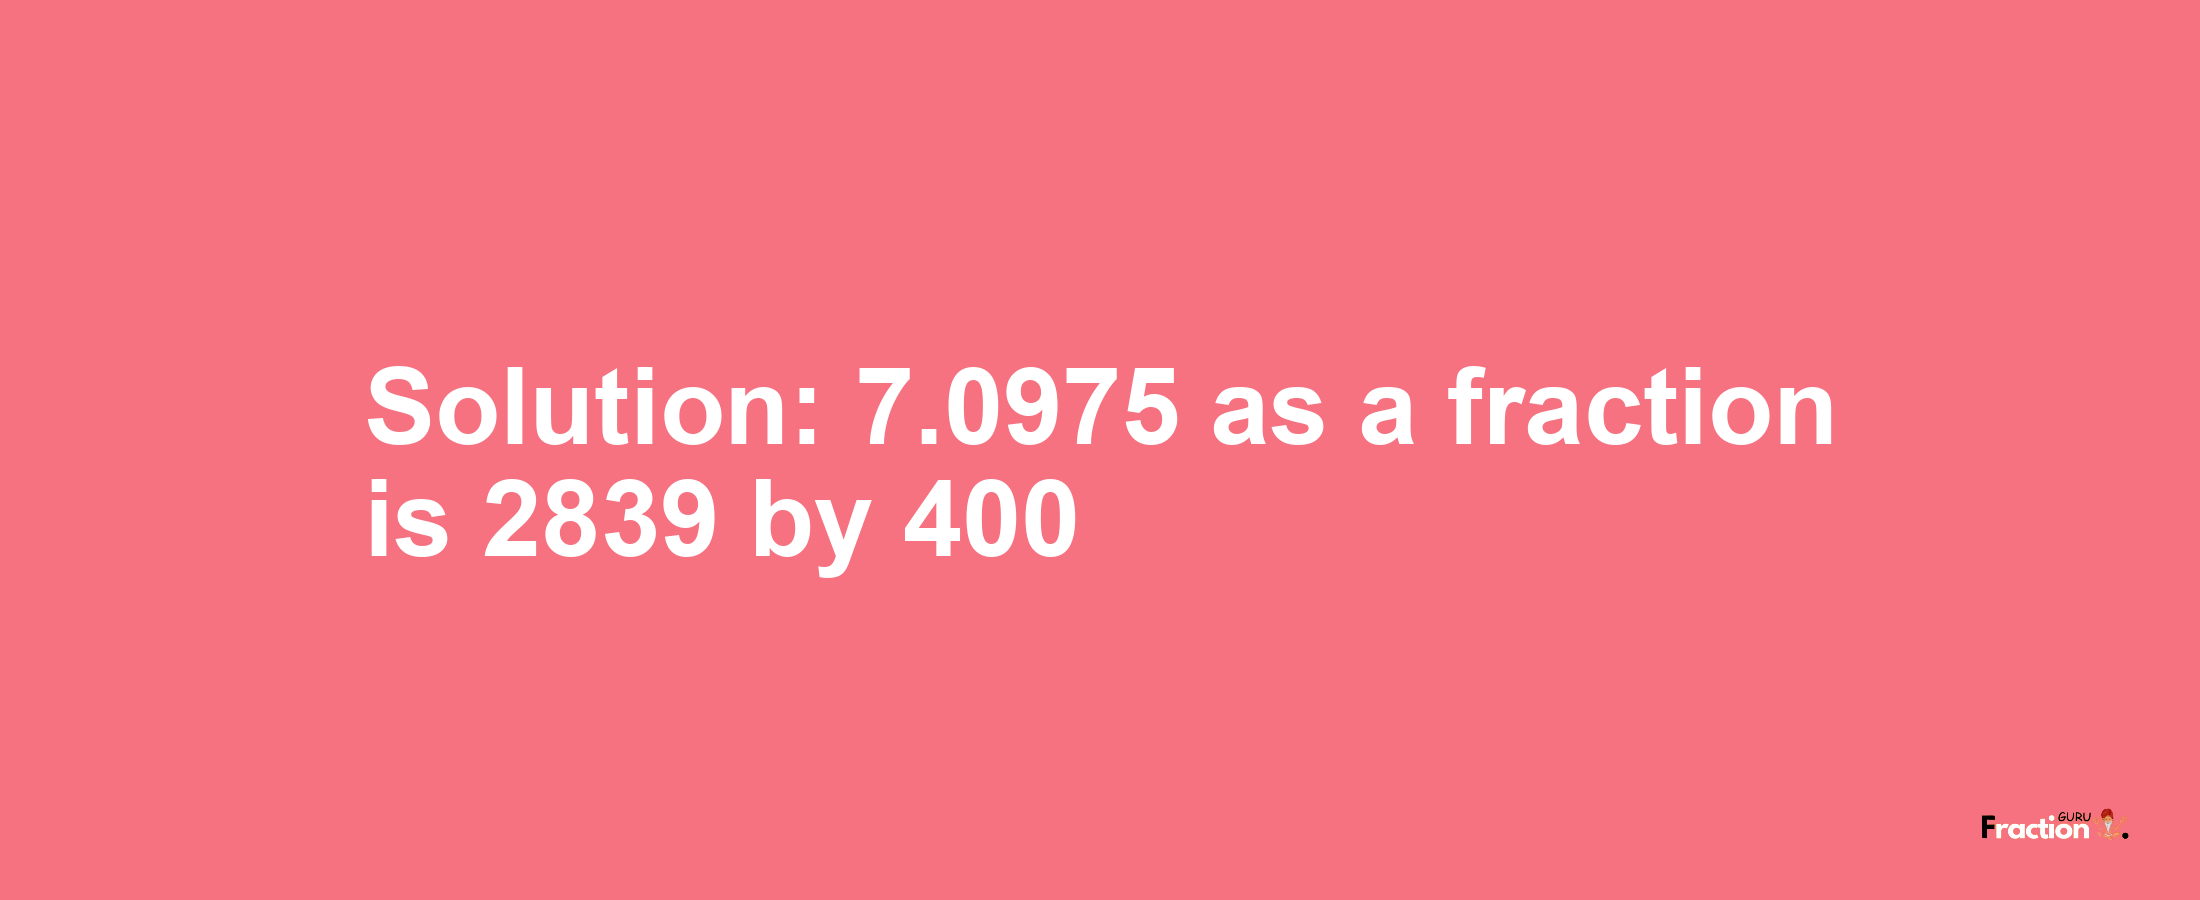 Solution:7.0975 as a fraction is 2839/400